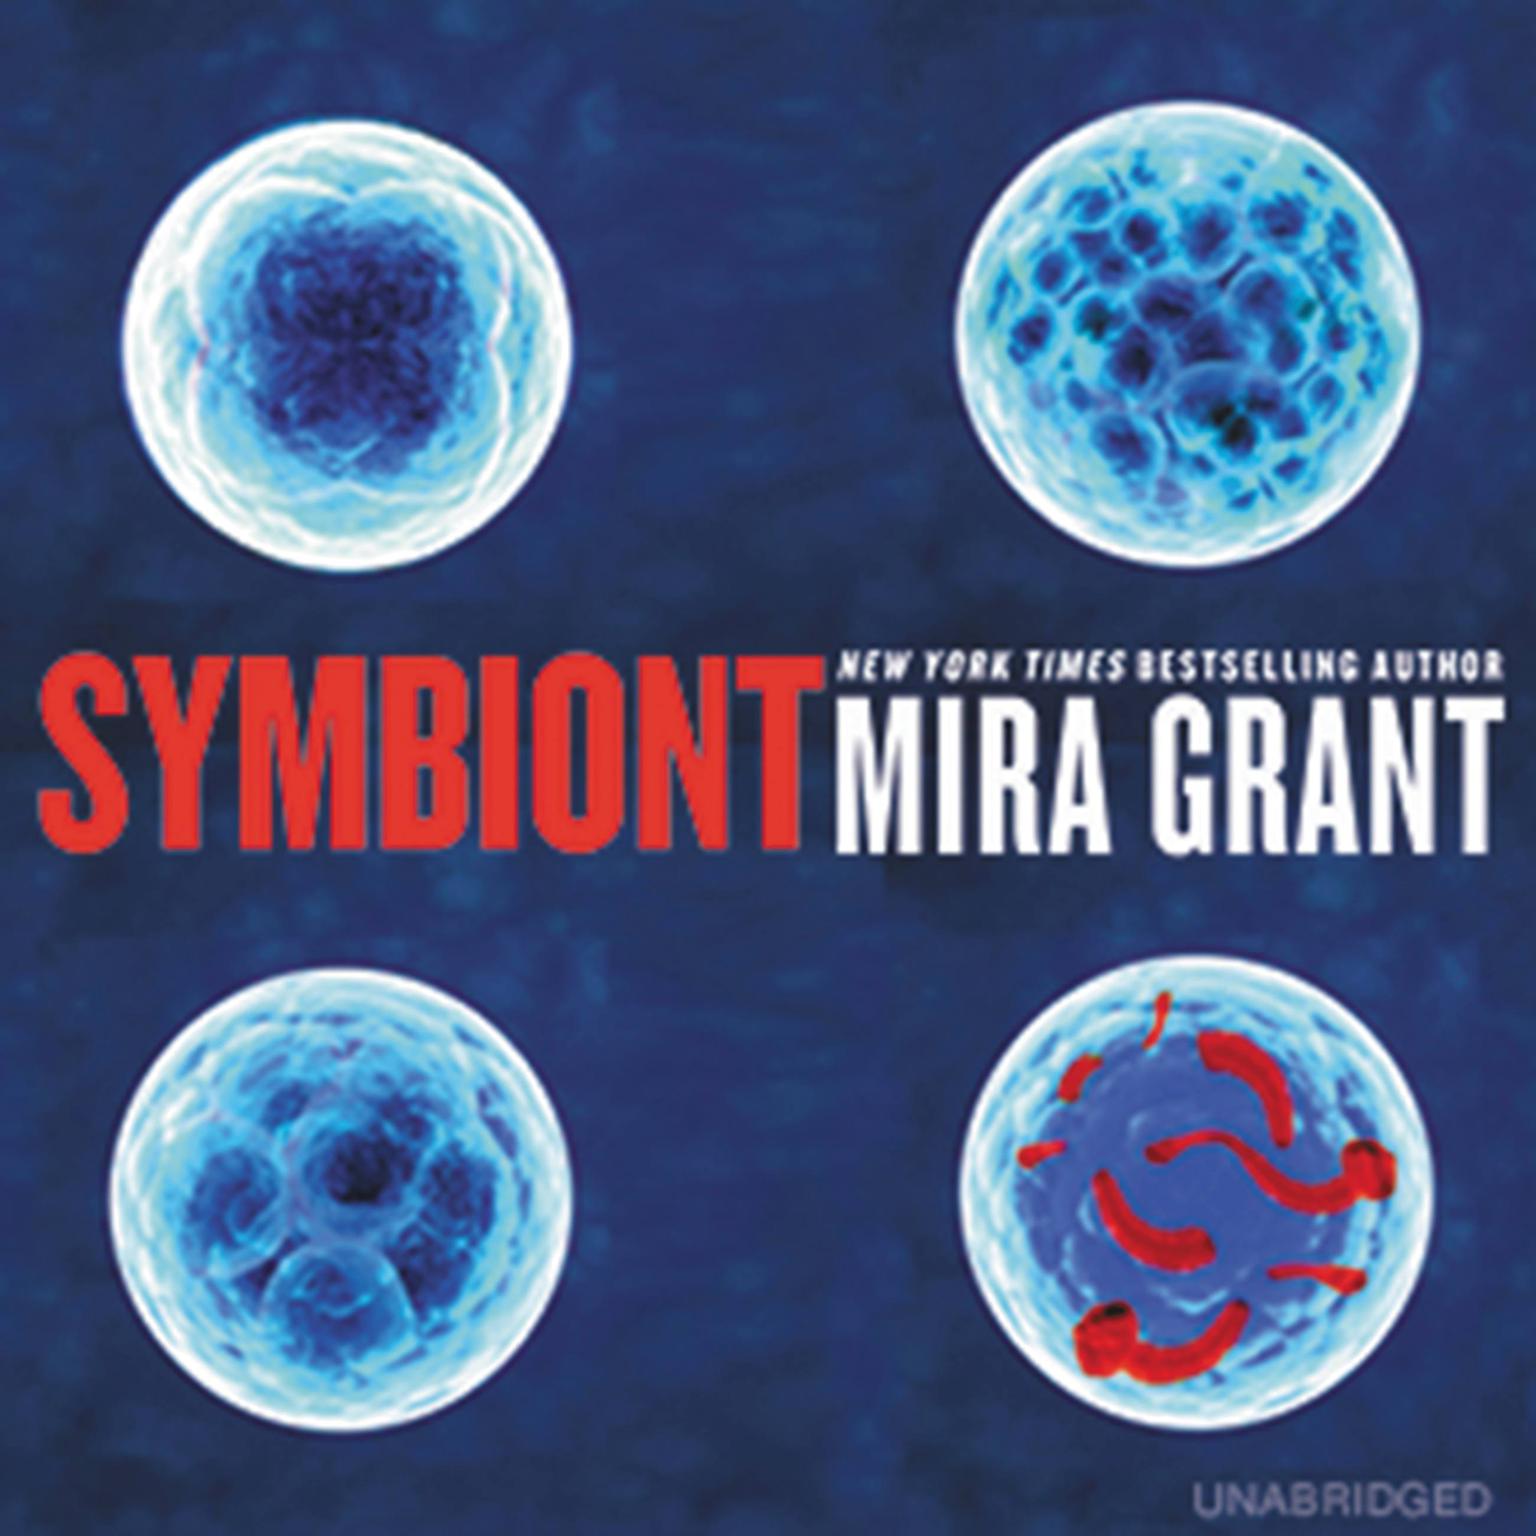 Symbiont Audiobook, by Mira Grant